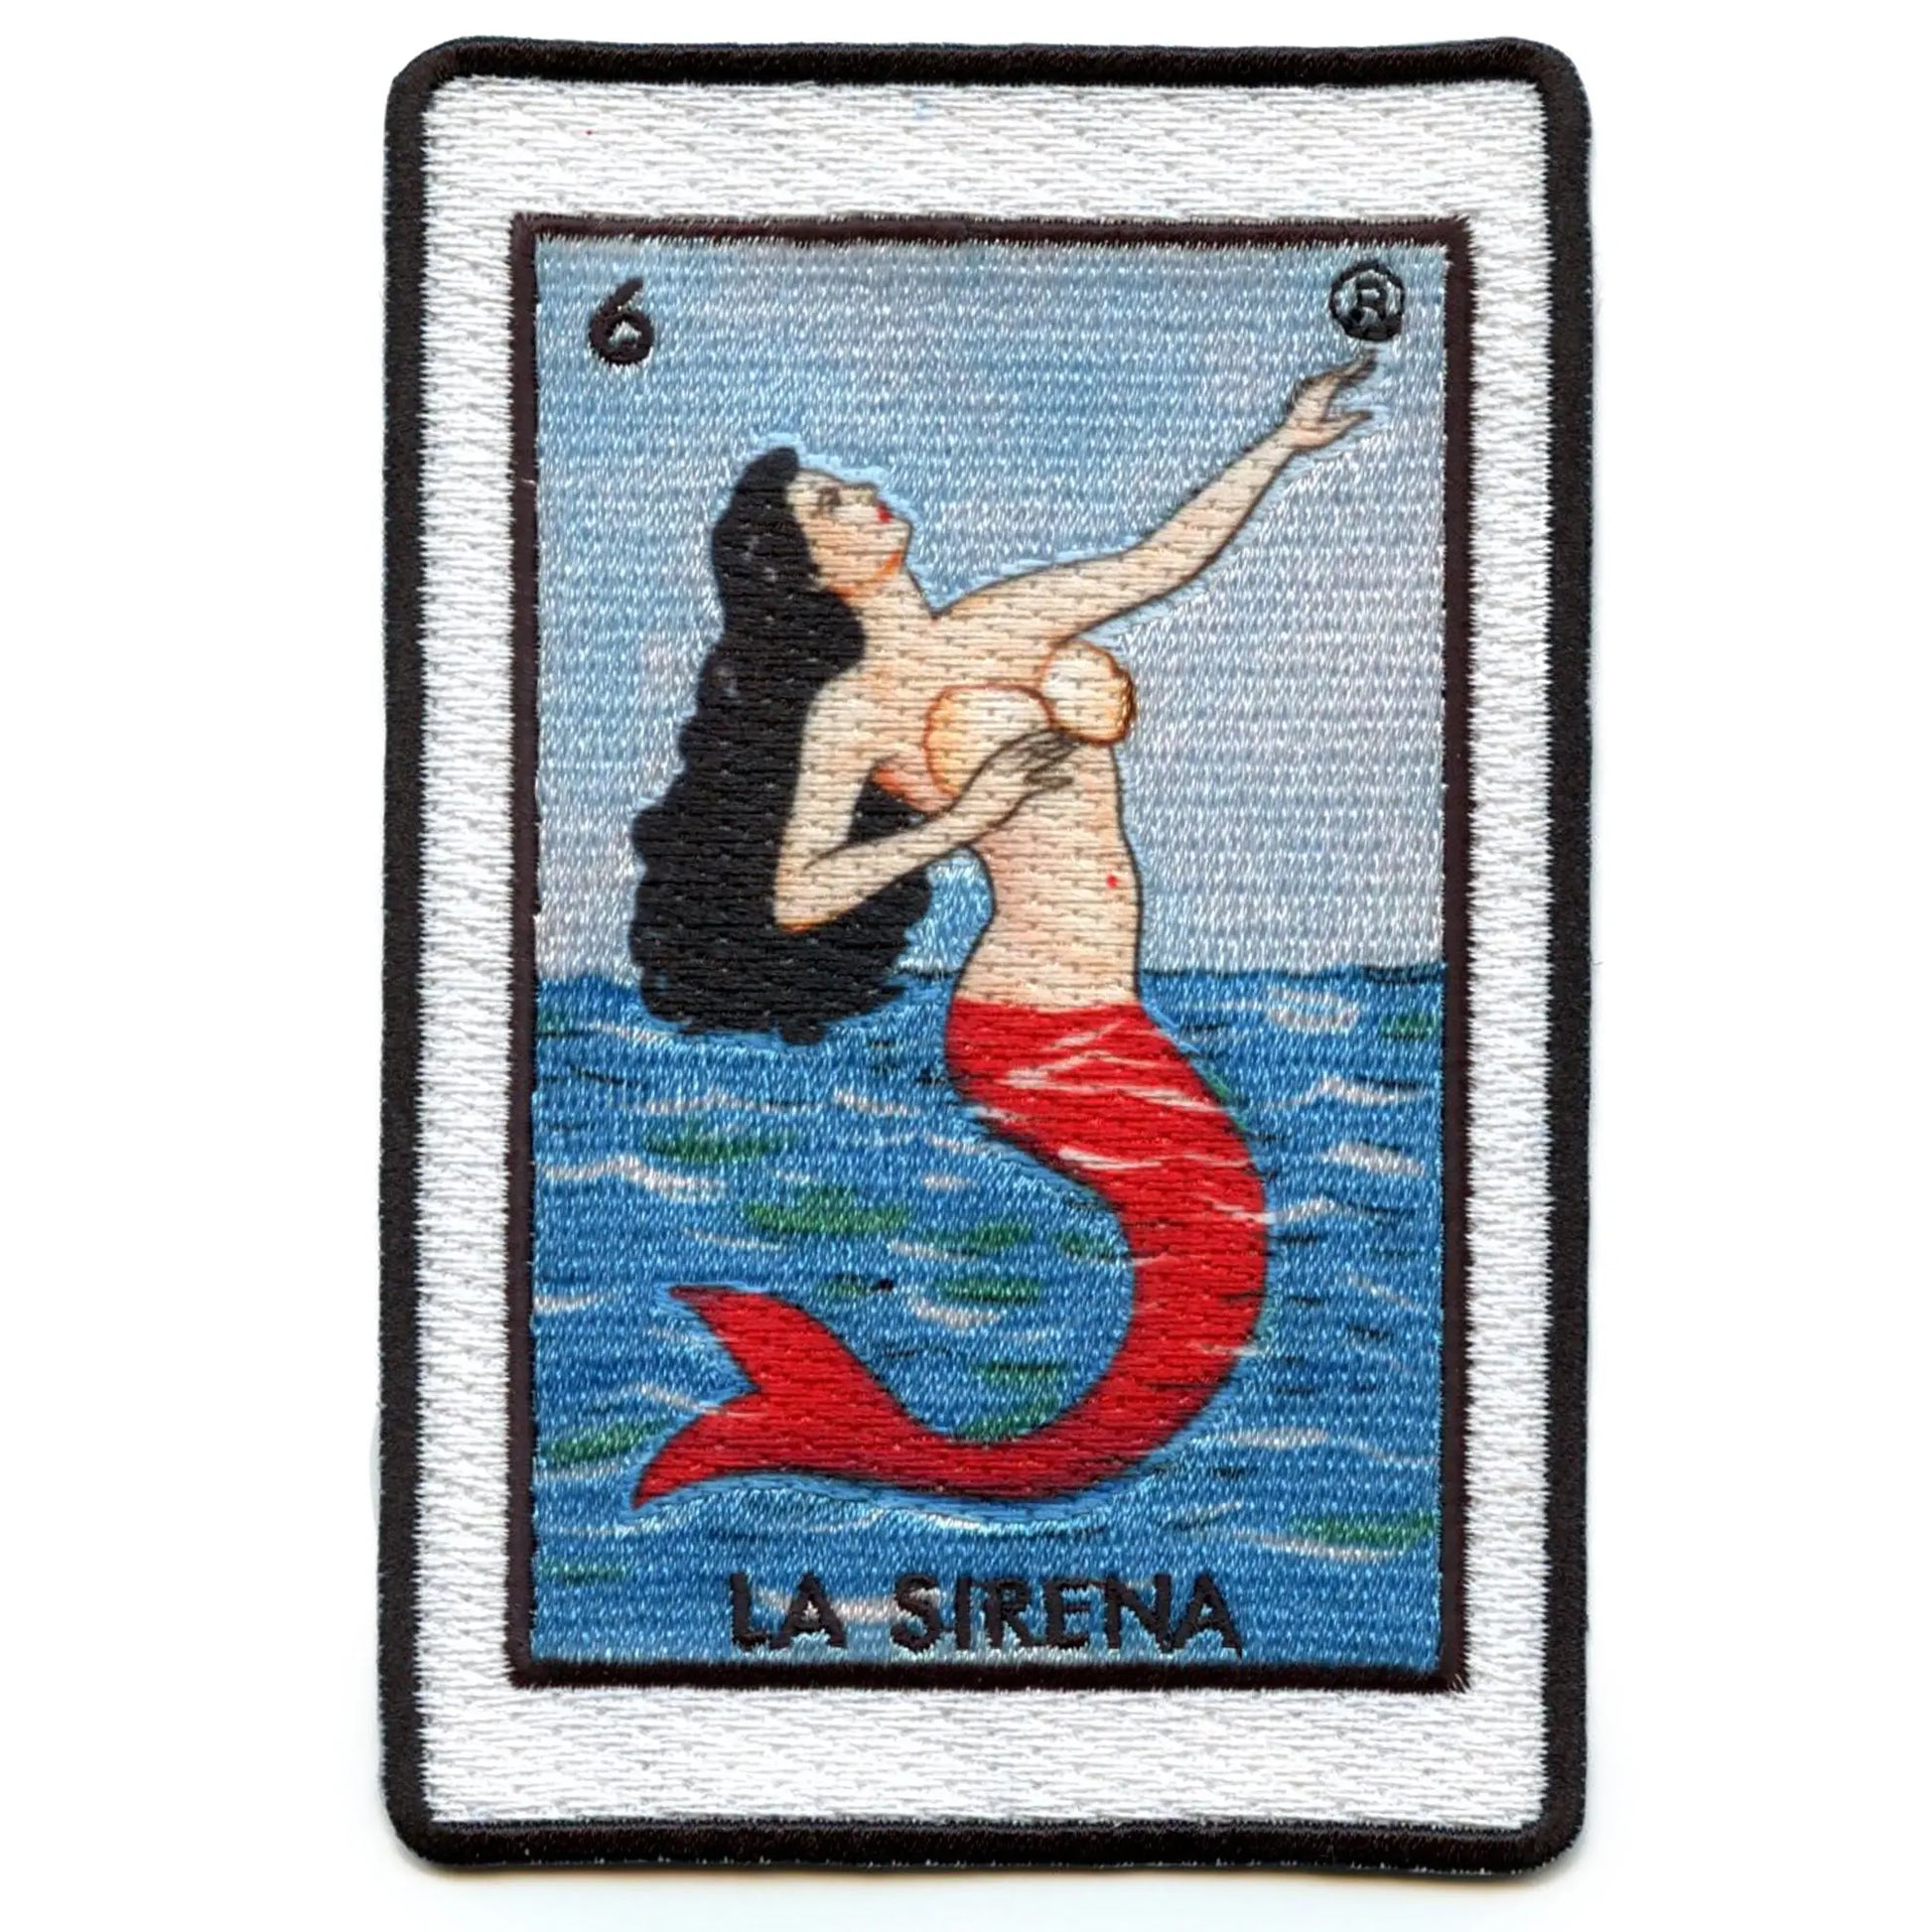 La Sirena 6 Patch Mexican Loteria Card Sublimated Embroidery Iron On